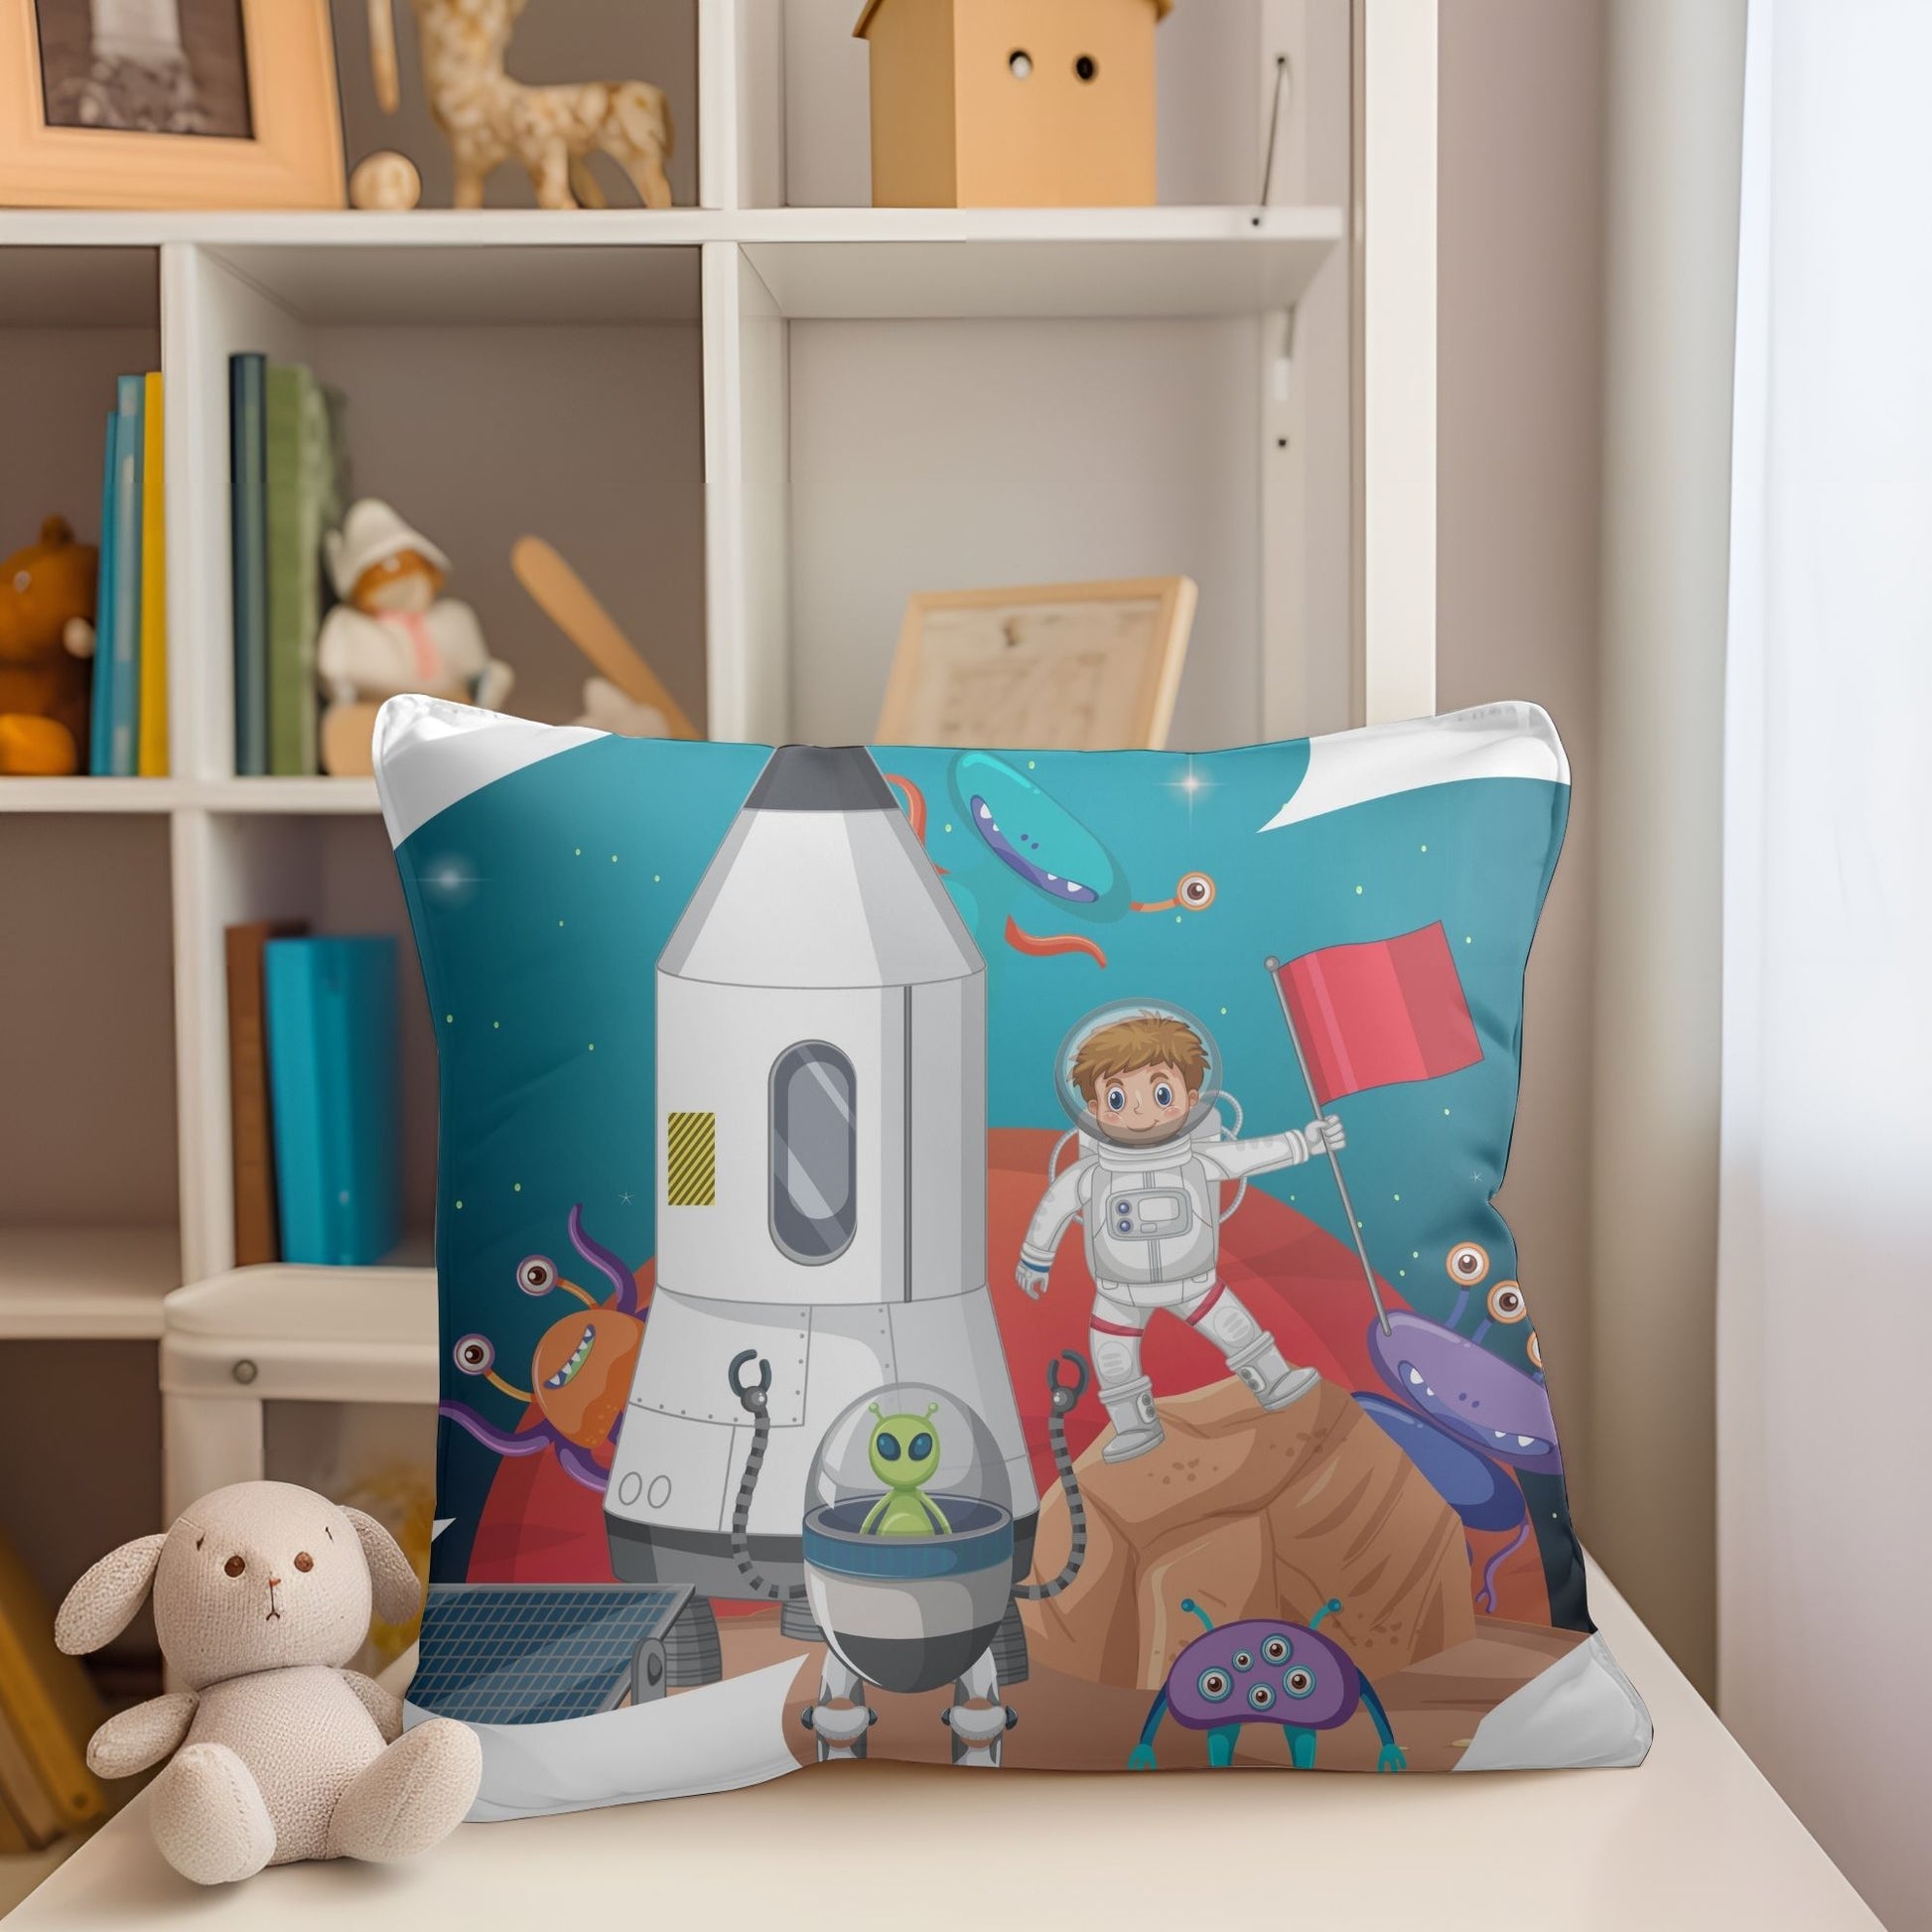 Adorable space mission patterned pillow to inspire young astronauts-in-training.